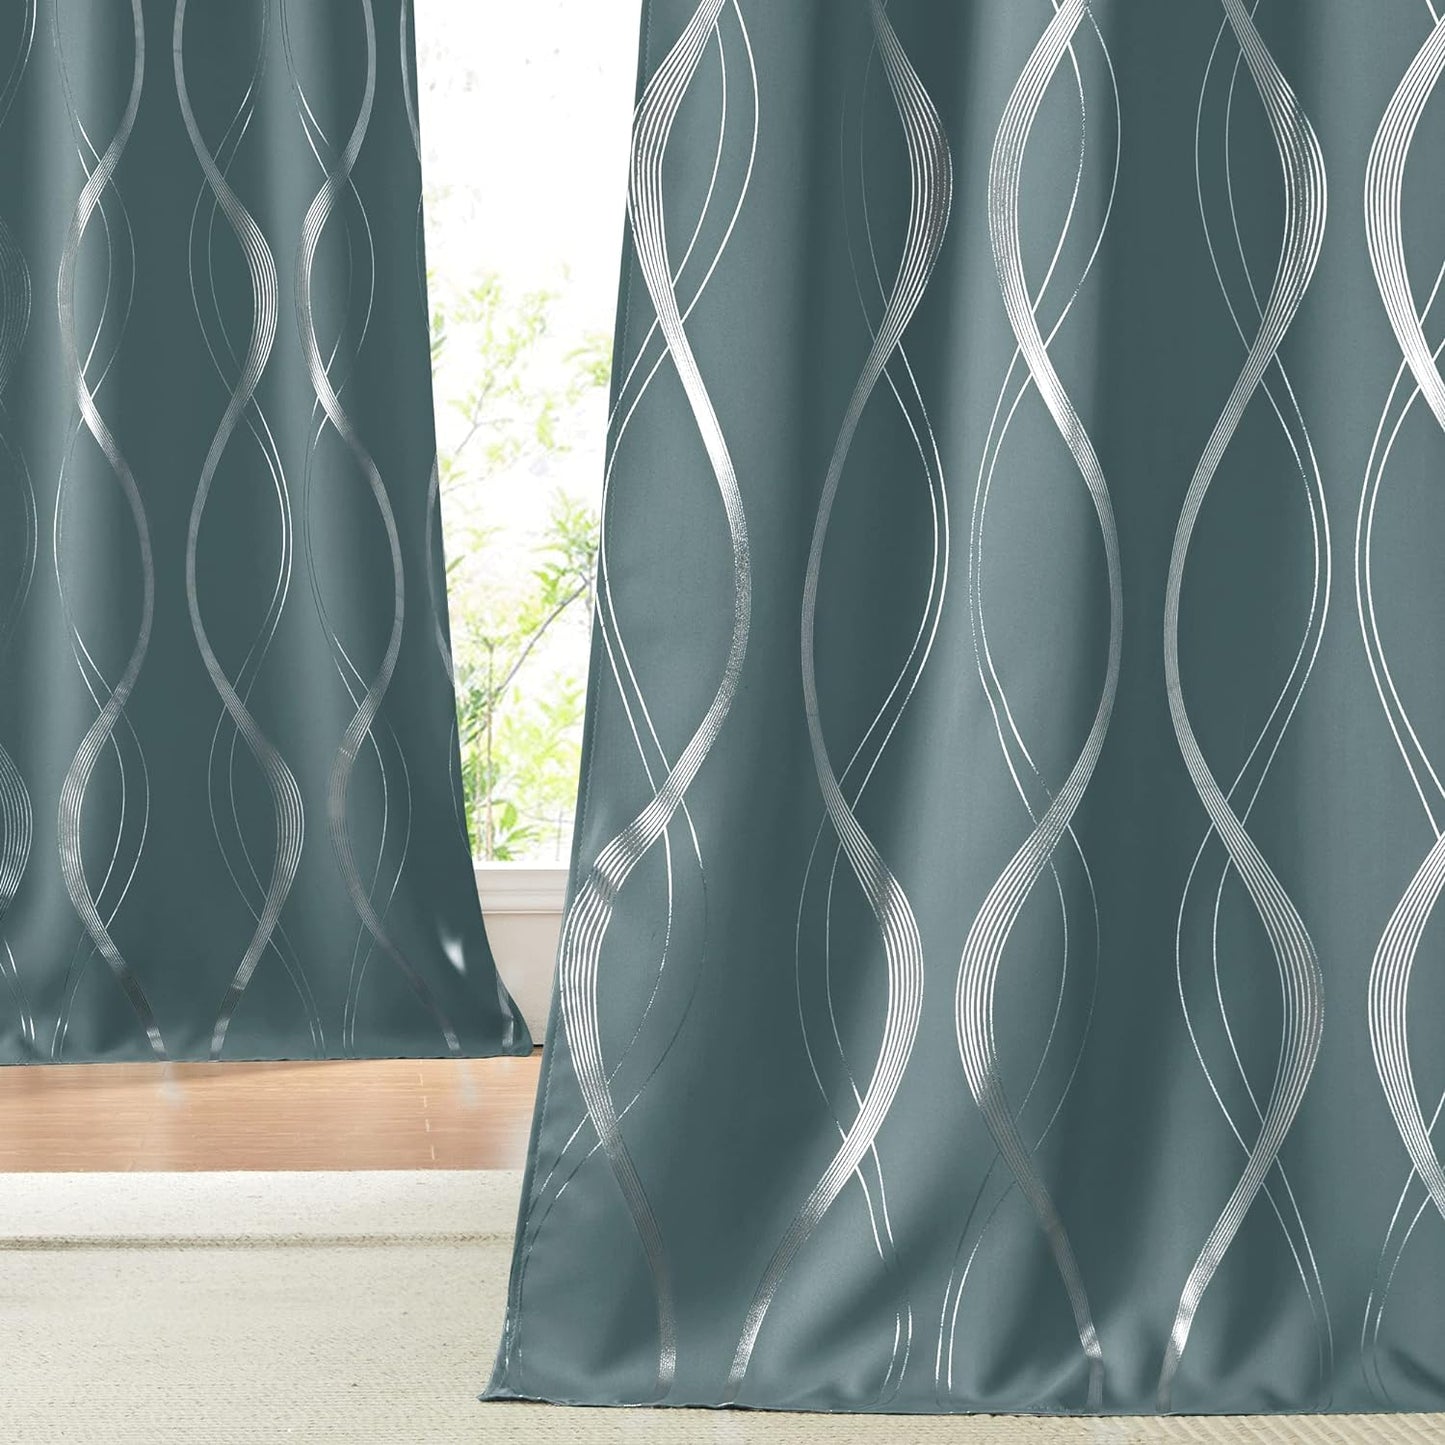 NICETOWN Grey Blackout Curtains 84 Inch Length 2 Panels Set for Bedroom/Living Room, Noise Reducing Thermal Insulated Wave Line Foil Print Drapes for Patio Sliding Glass Door (52 X 84, Gray)  NICETOWN Greyish Blue 52"W X 84"L 